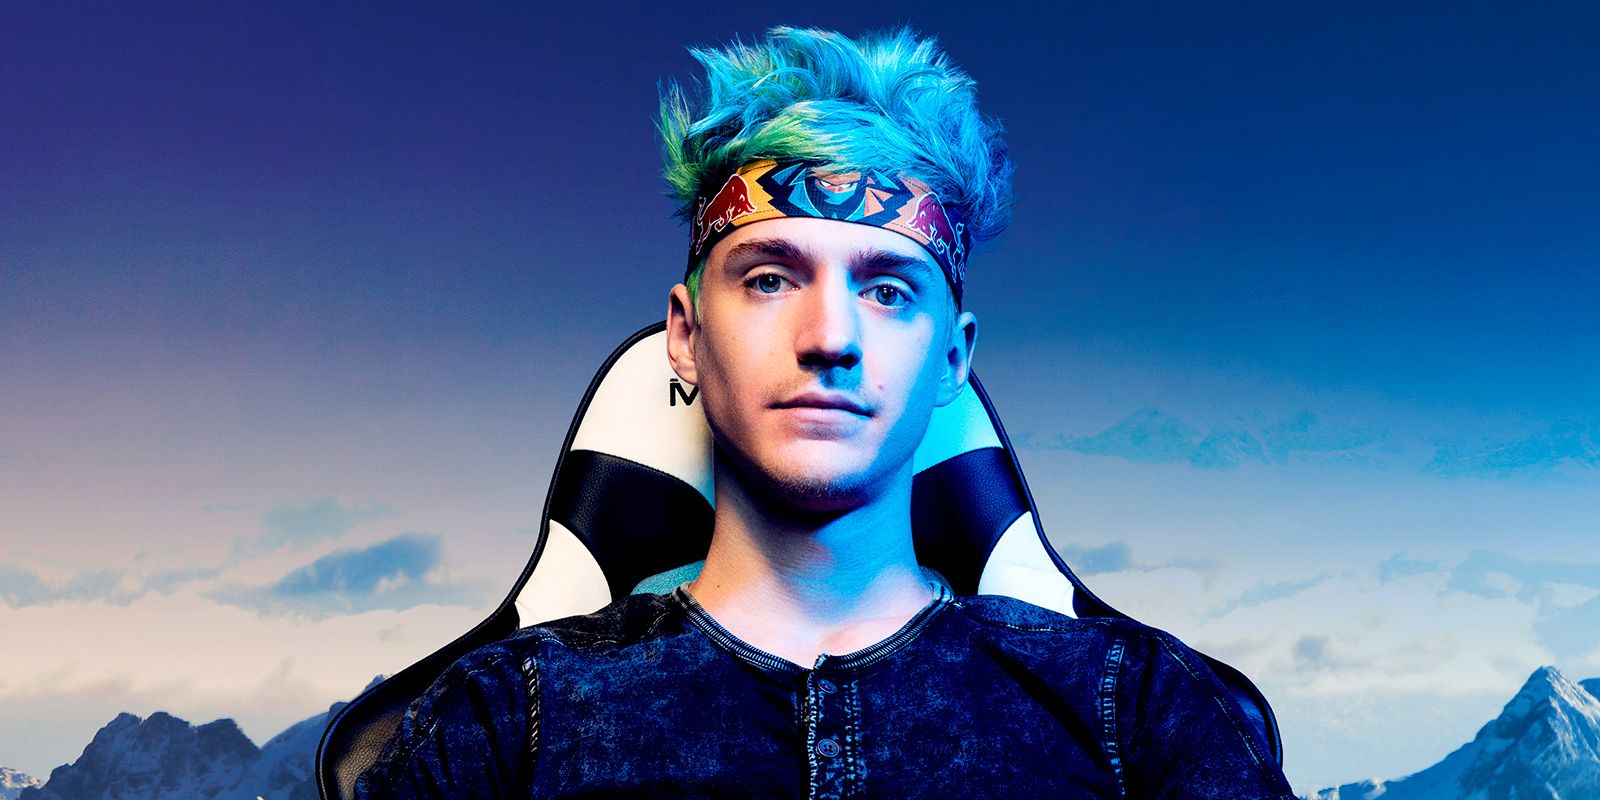  Schedule test stream suggests Ninja could be streaming exclusively on YouTube 